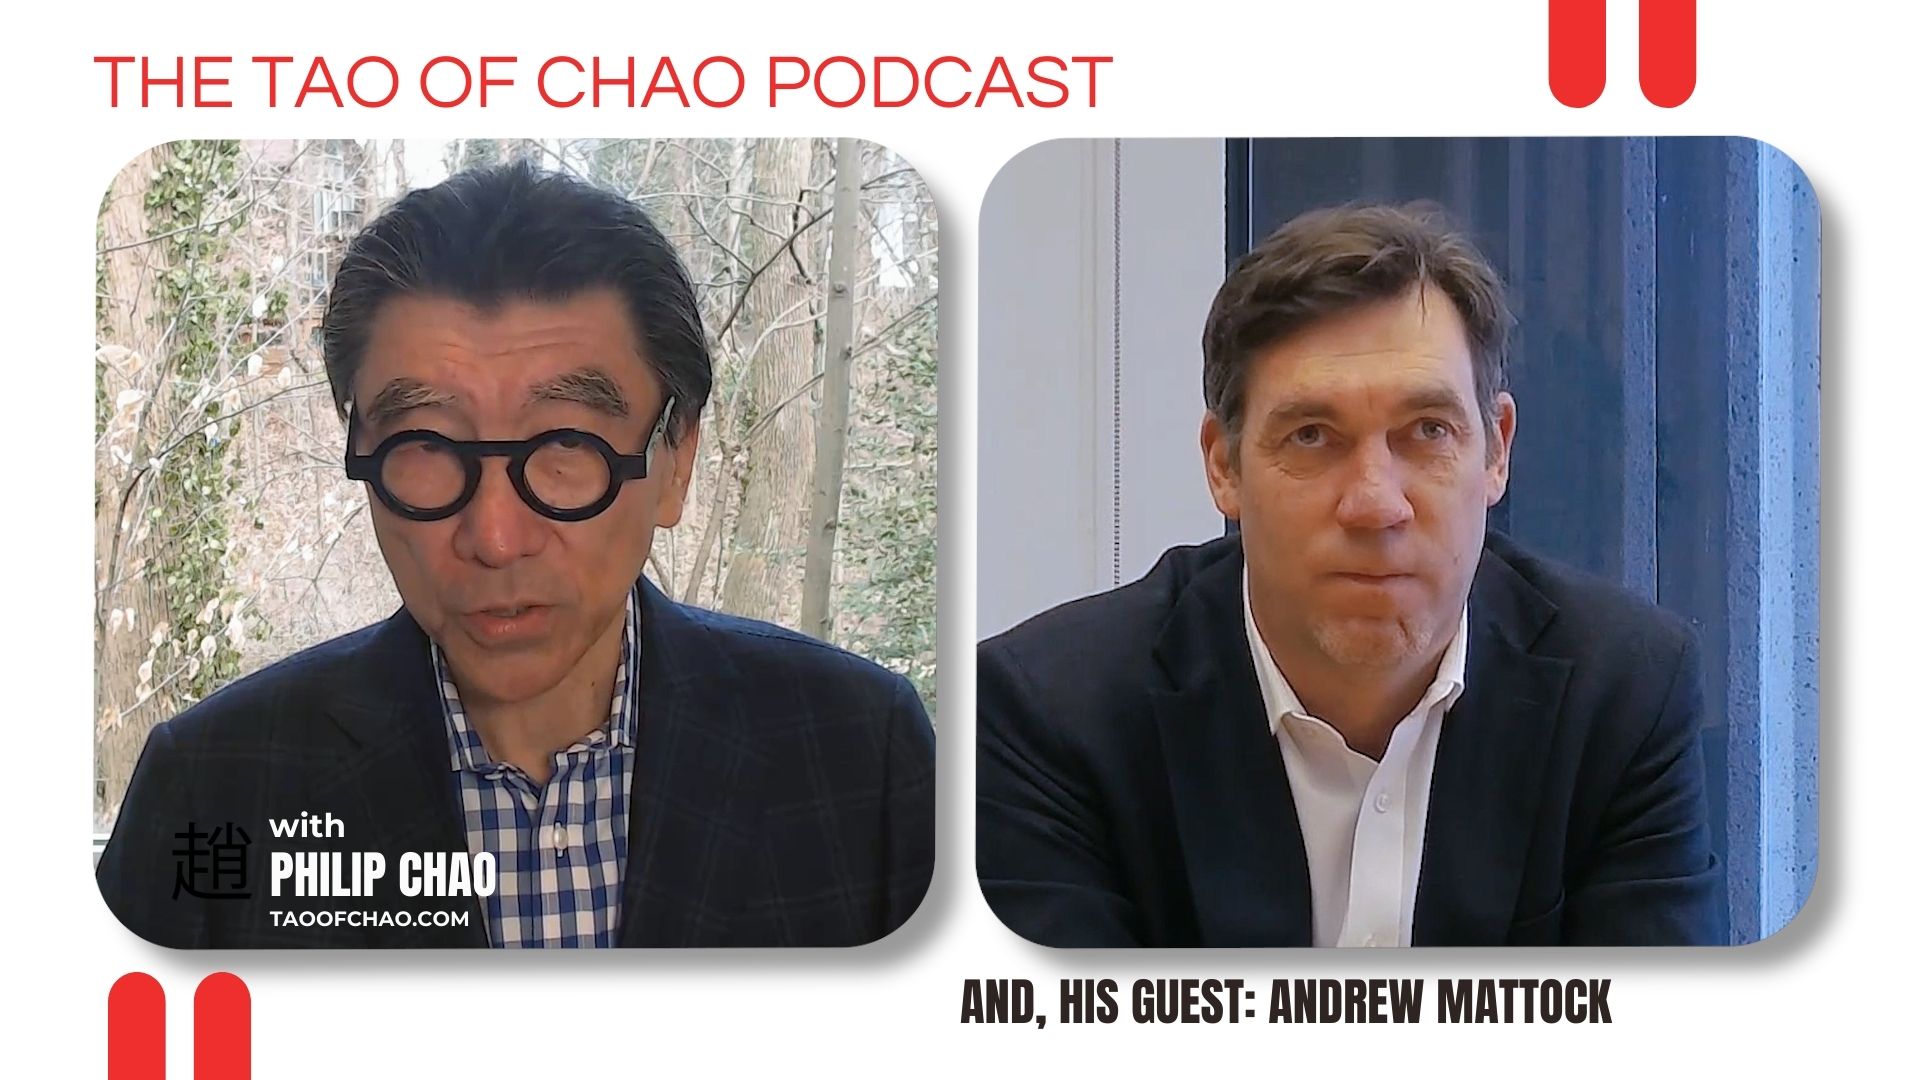 Tao of Chao Podcast with Andrew Mattock – Portfolio Manager at Matthews Asia